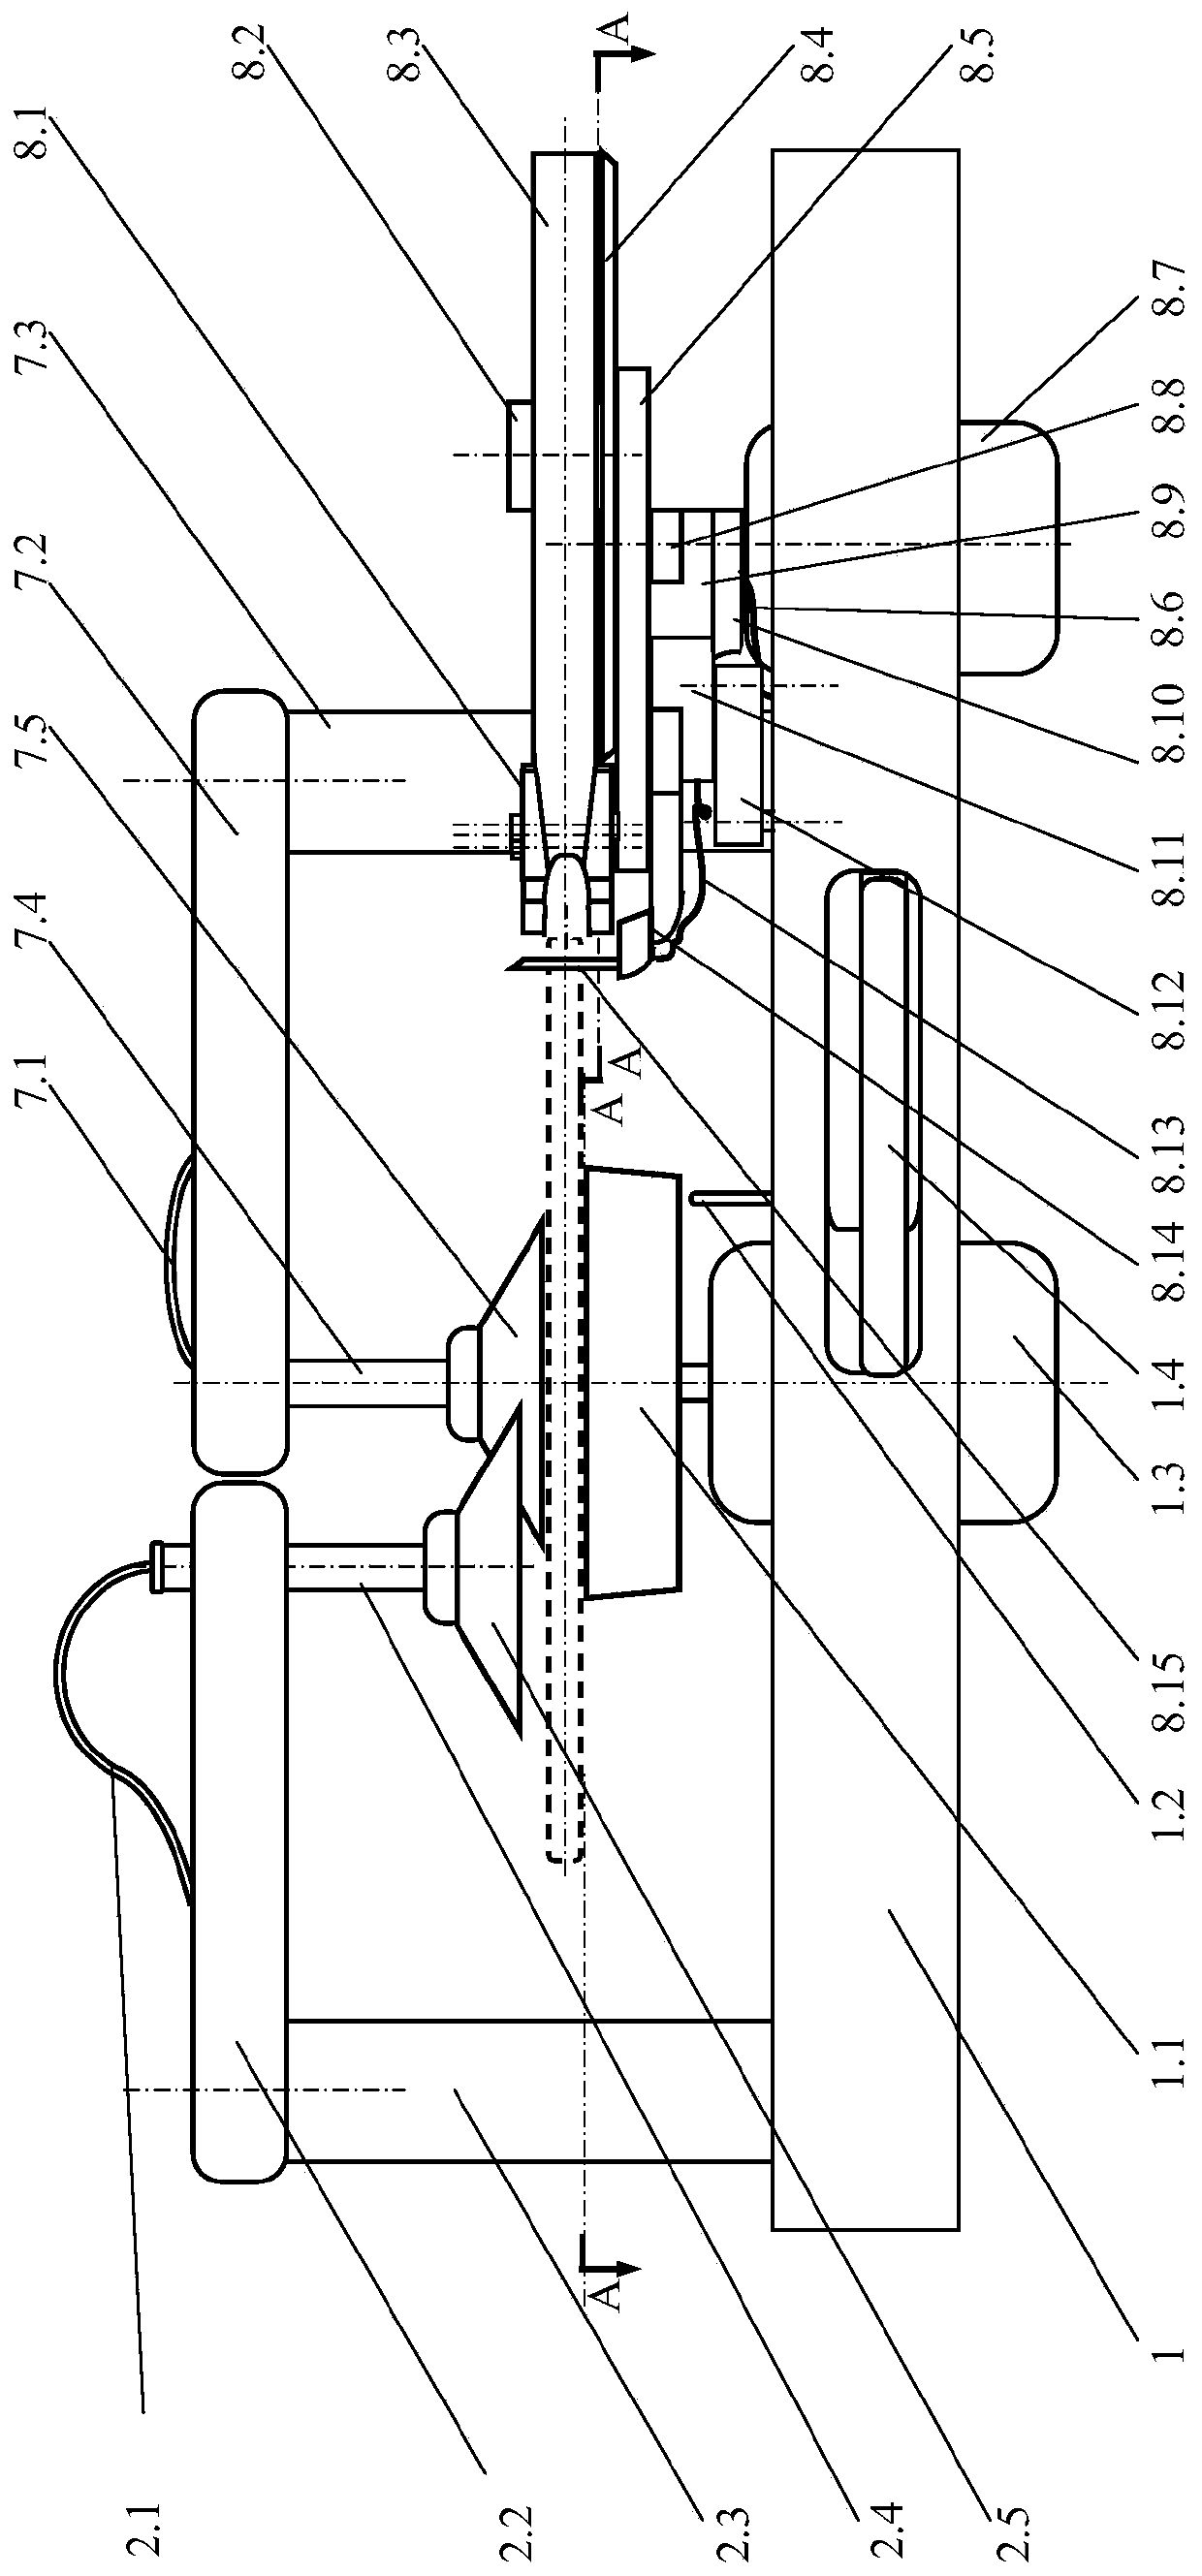 Tape packaging flow of software of plate-shaped workpiece edge covering system